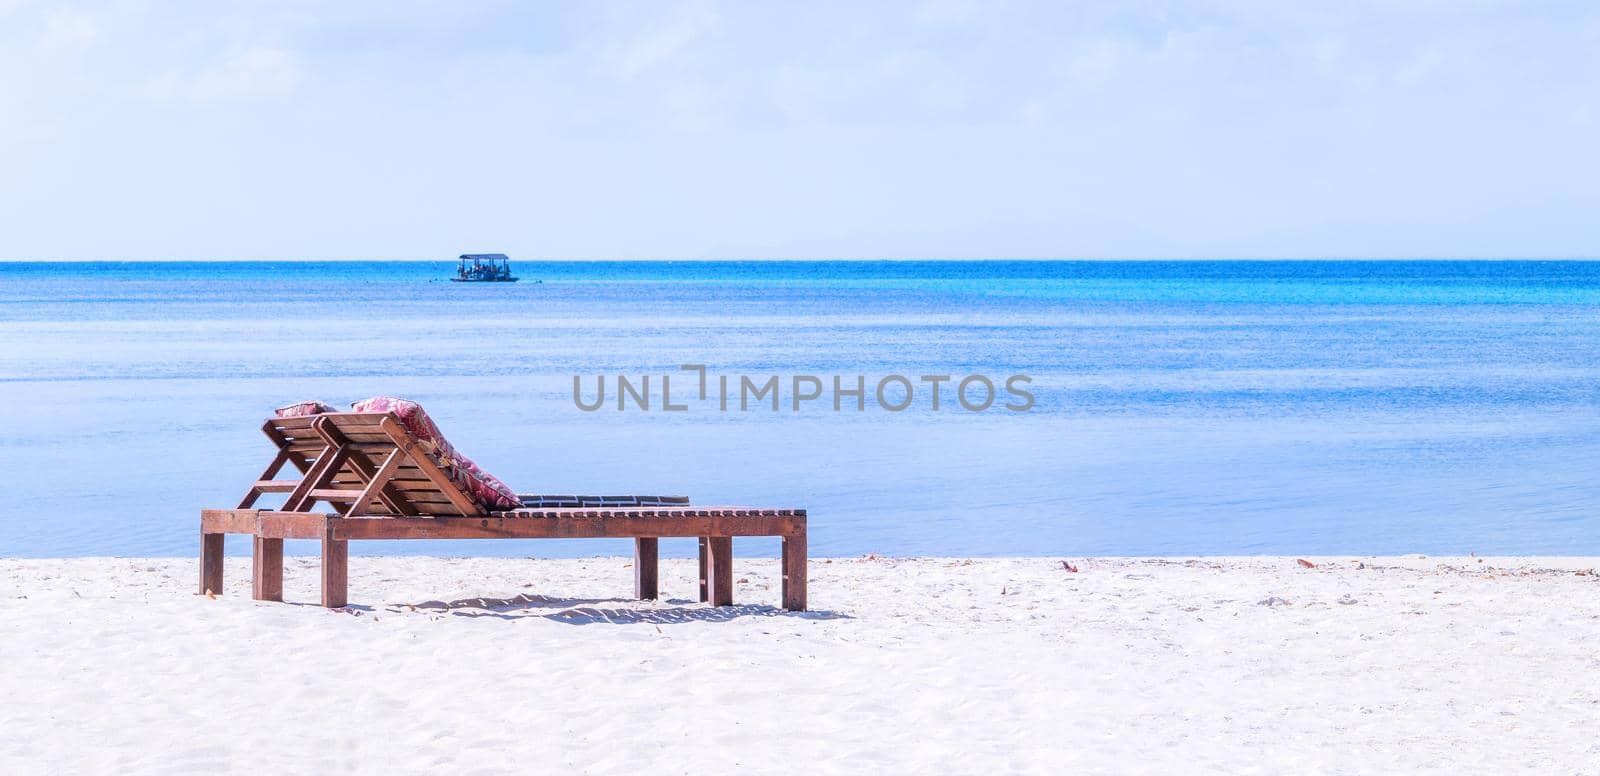 Chairs on the amazing beautiful sandy beach near the ocean with blue sky. Concept of summer leisure calm vacation for a tourism idea. Empty copy space, inspiration of tropical landscape by ROMIXIMAGE